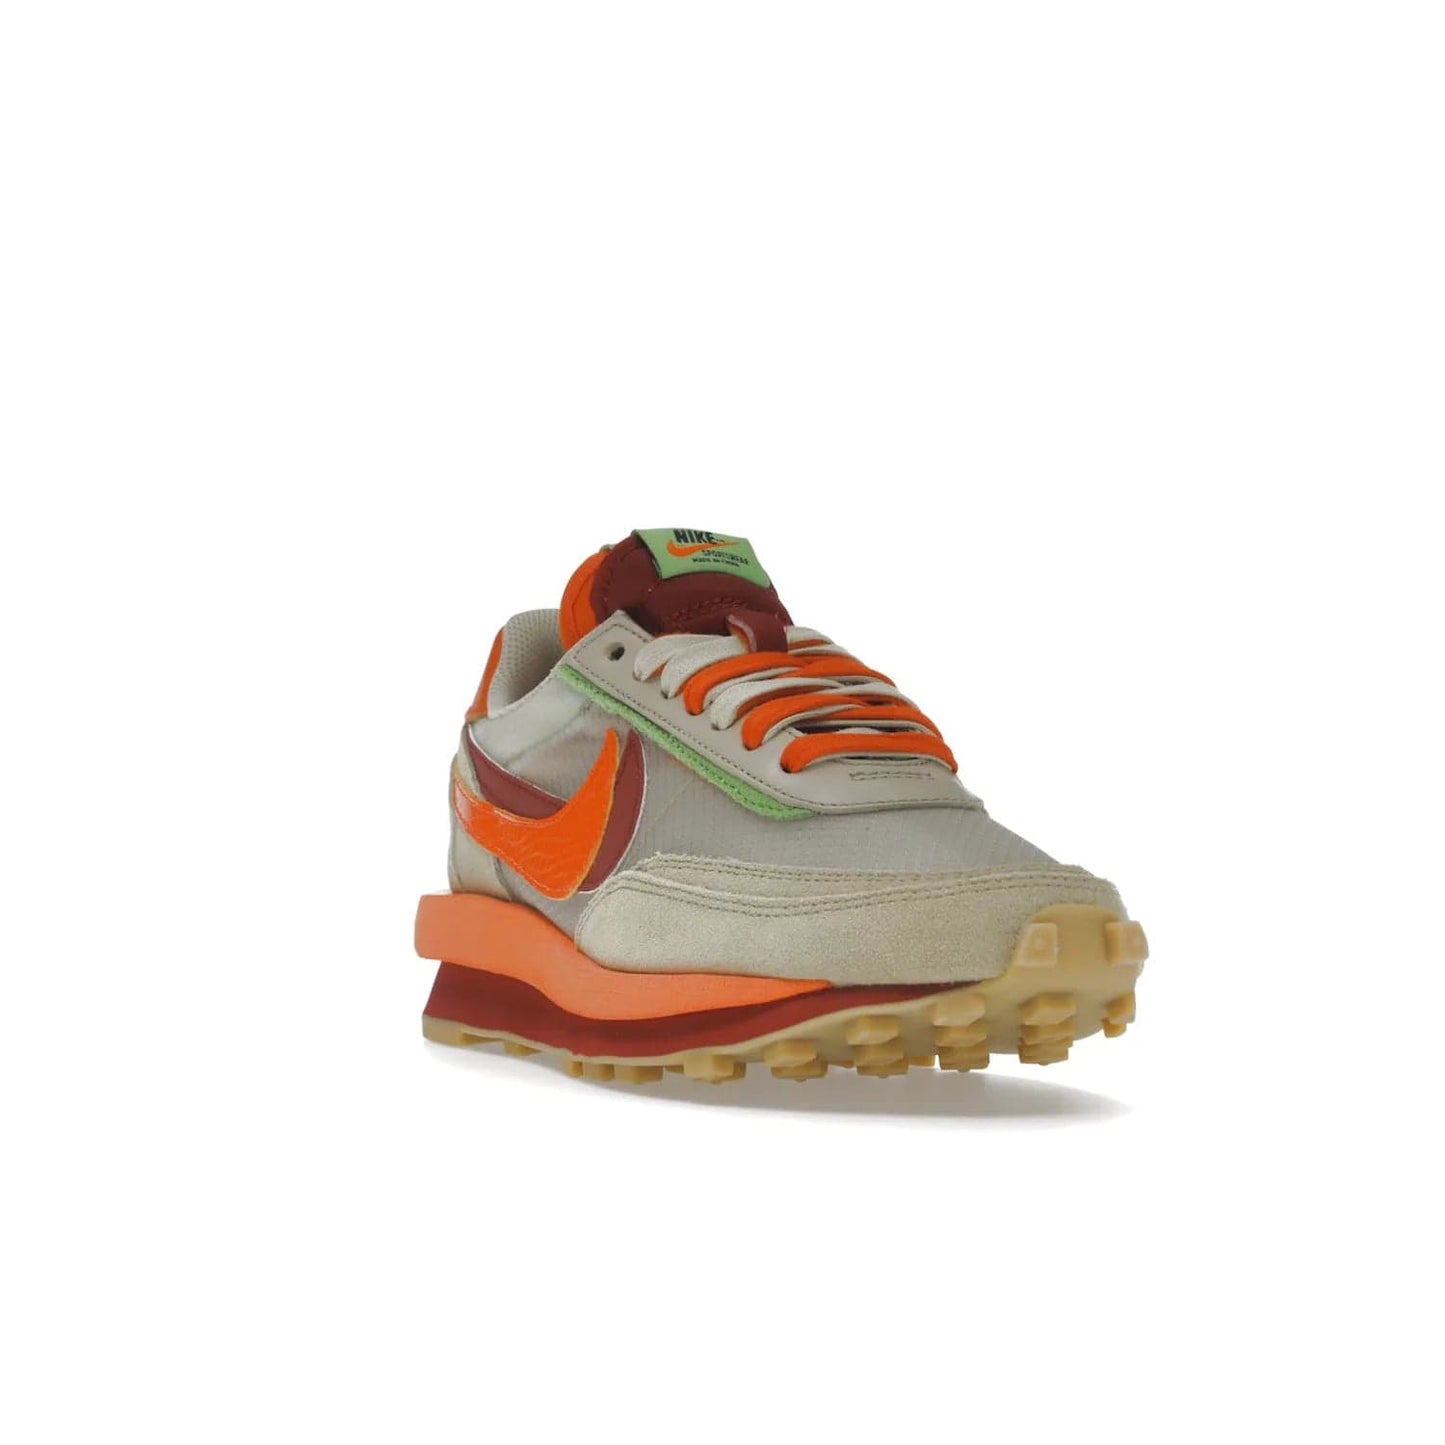 Nike LD Waffle sacai CLOT Kiss of Death Net Orange Blaze - Image 7 - Only at www.BallersClubKickz.com - A bold and stylish Nike LD Waffle sacai CLOT Kiss of Death Net Orange Blaze sneaker featuring a unique off-white, Deep Red & Orange Blaze Swooshes, two-toned stacked sole and doubled tongue. Available in September 2021. Make a statement.